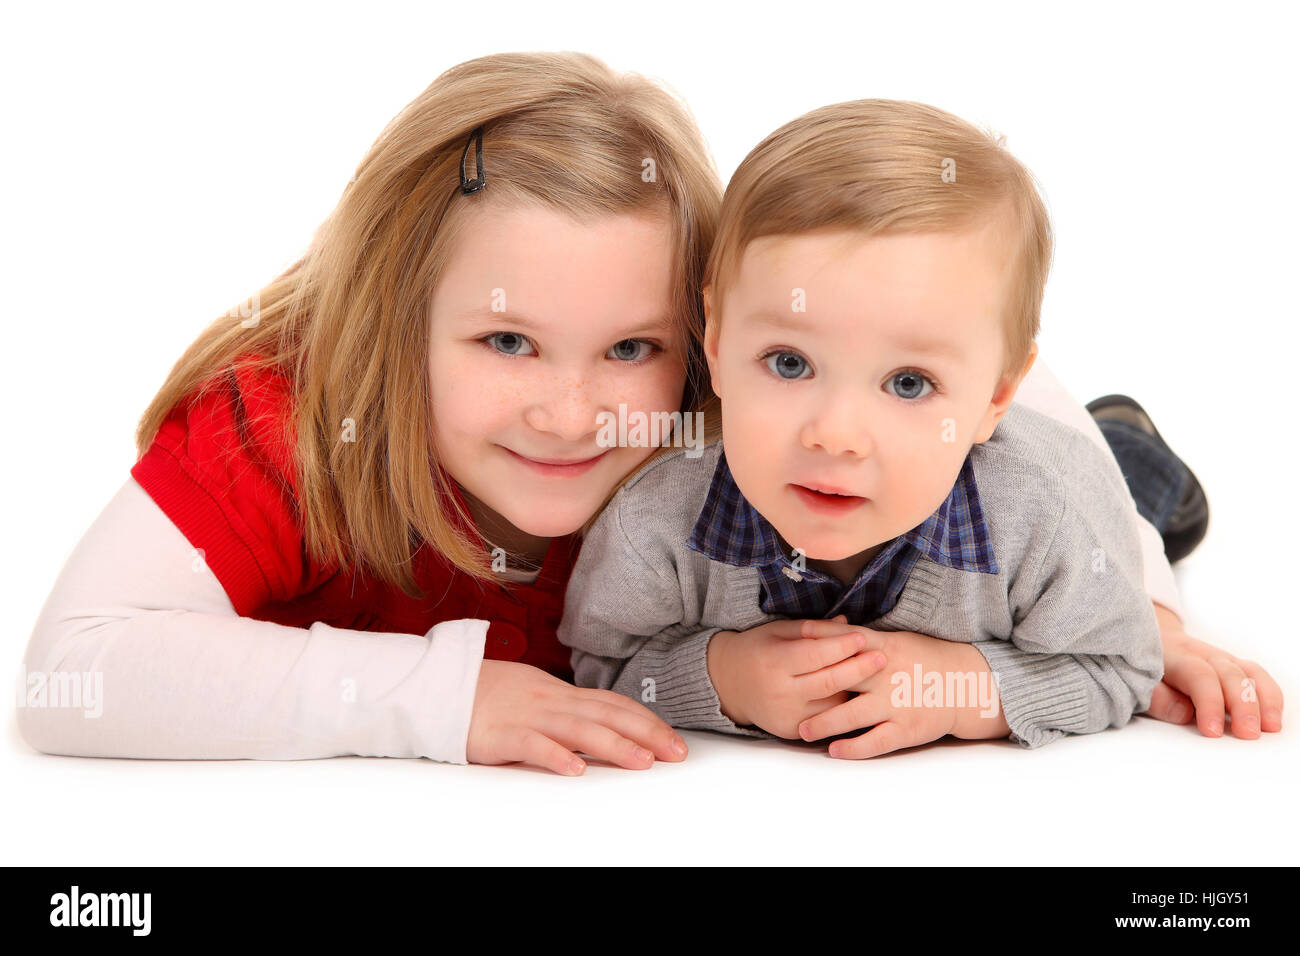 relaxed, sister, brother, brethren, boy, lad, male youngster, couple, pair, Stock Photo